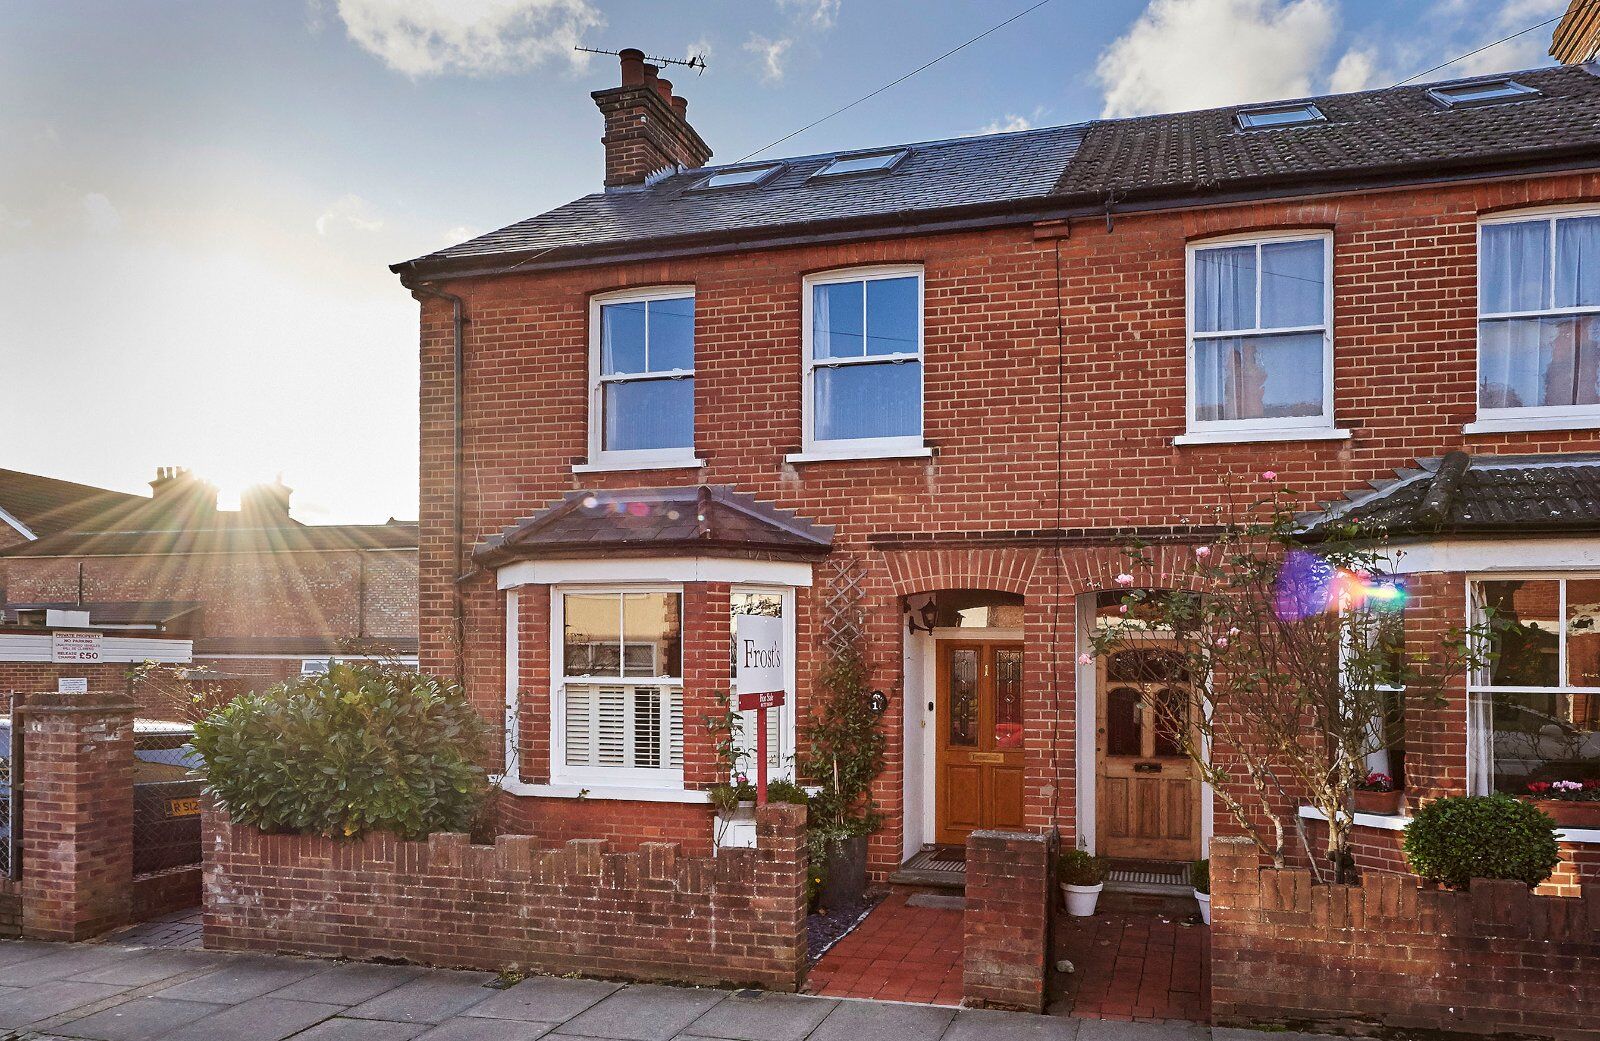 4 bedroom end terraced house for sale Sandfield Road, St. Albans, AL1, main image